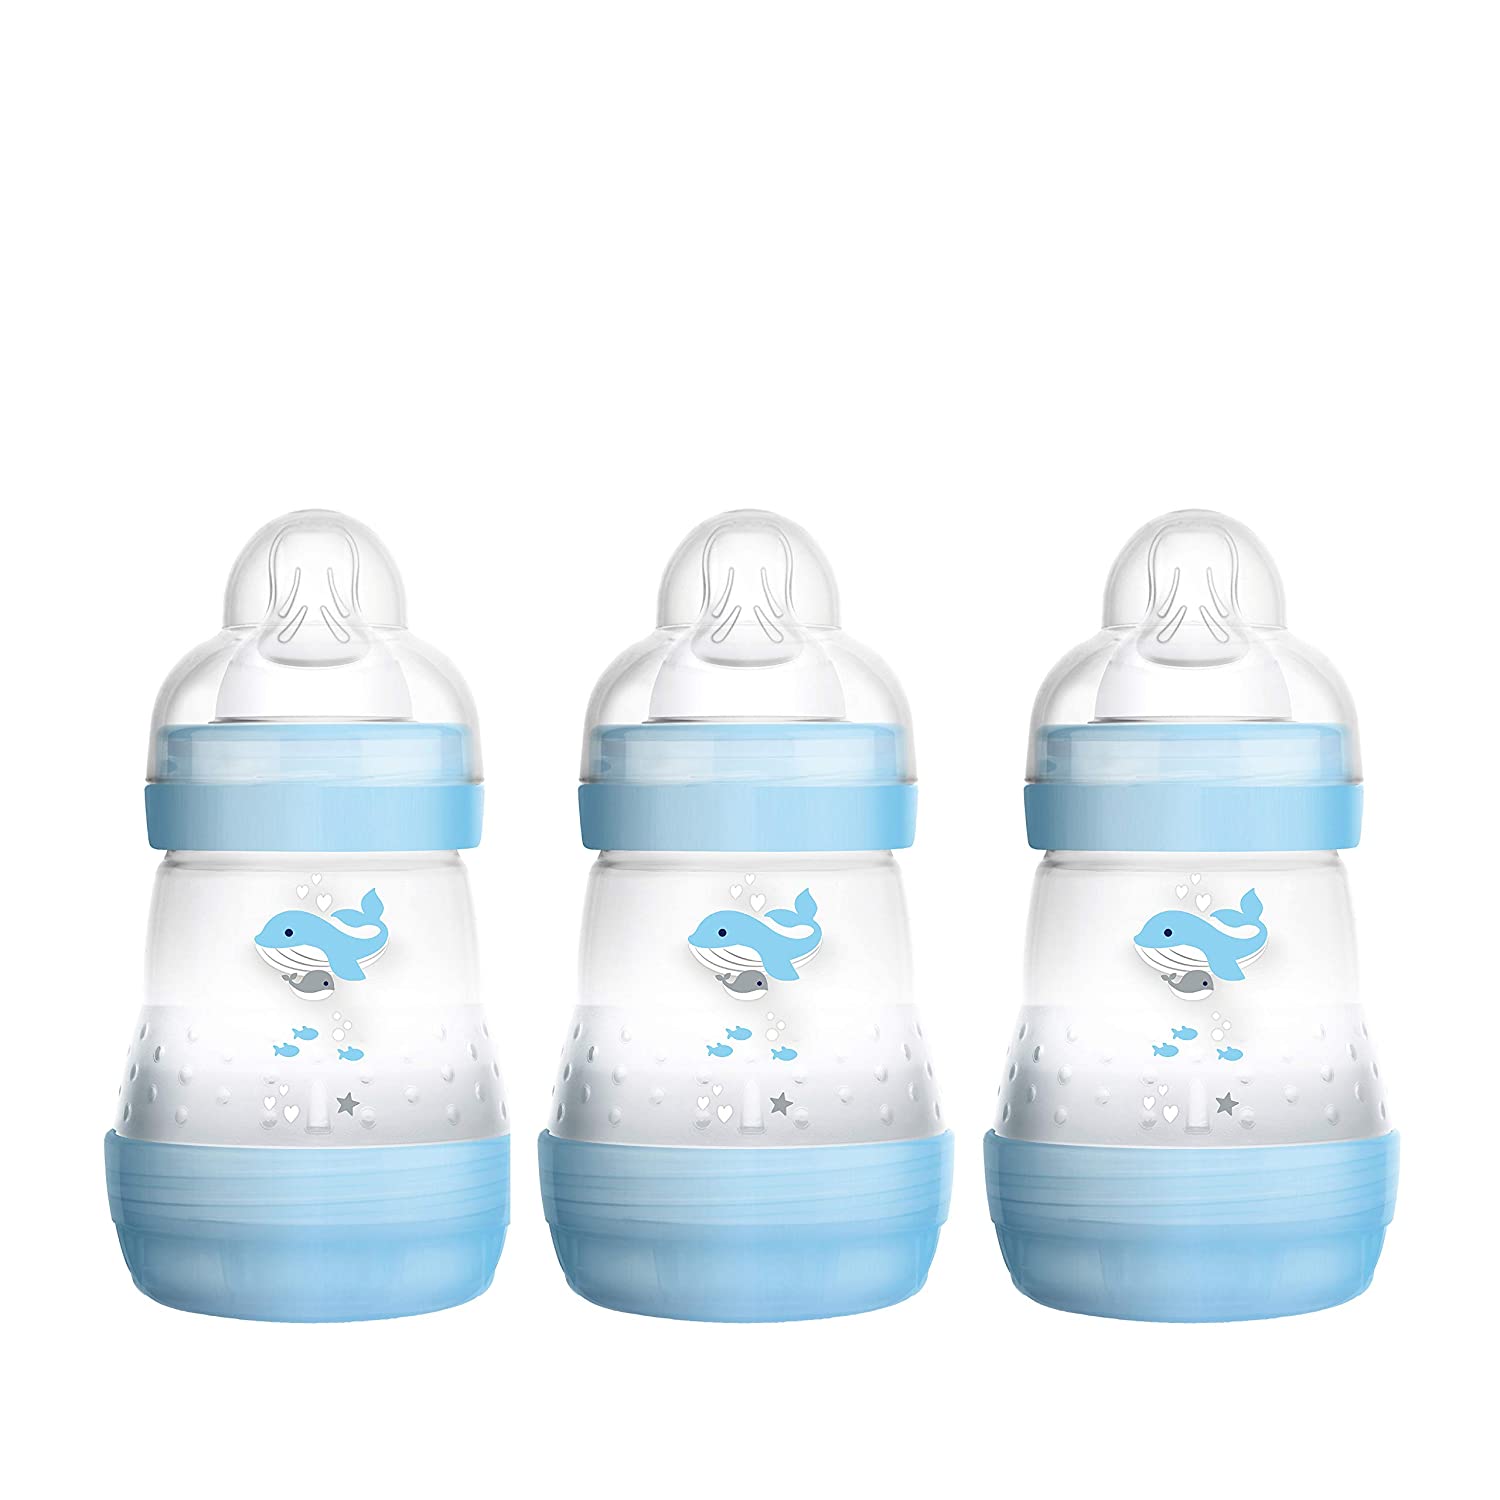 MAM Easy Start anti-colic baby bottle (160 ml), milk bottle with innovative base valve to prevent colic, baby’s drinking bottle with size 1 teat, from birth, bear